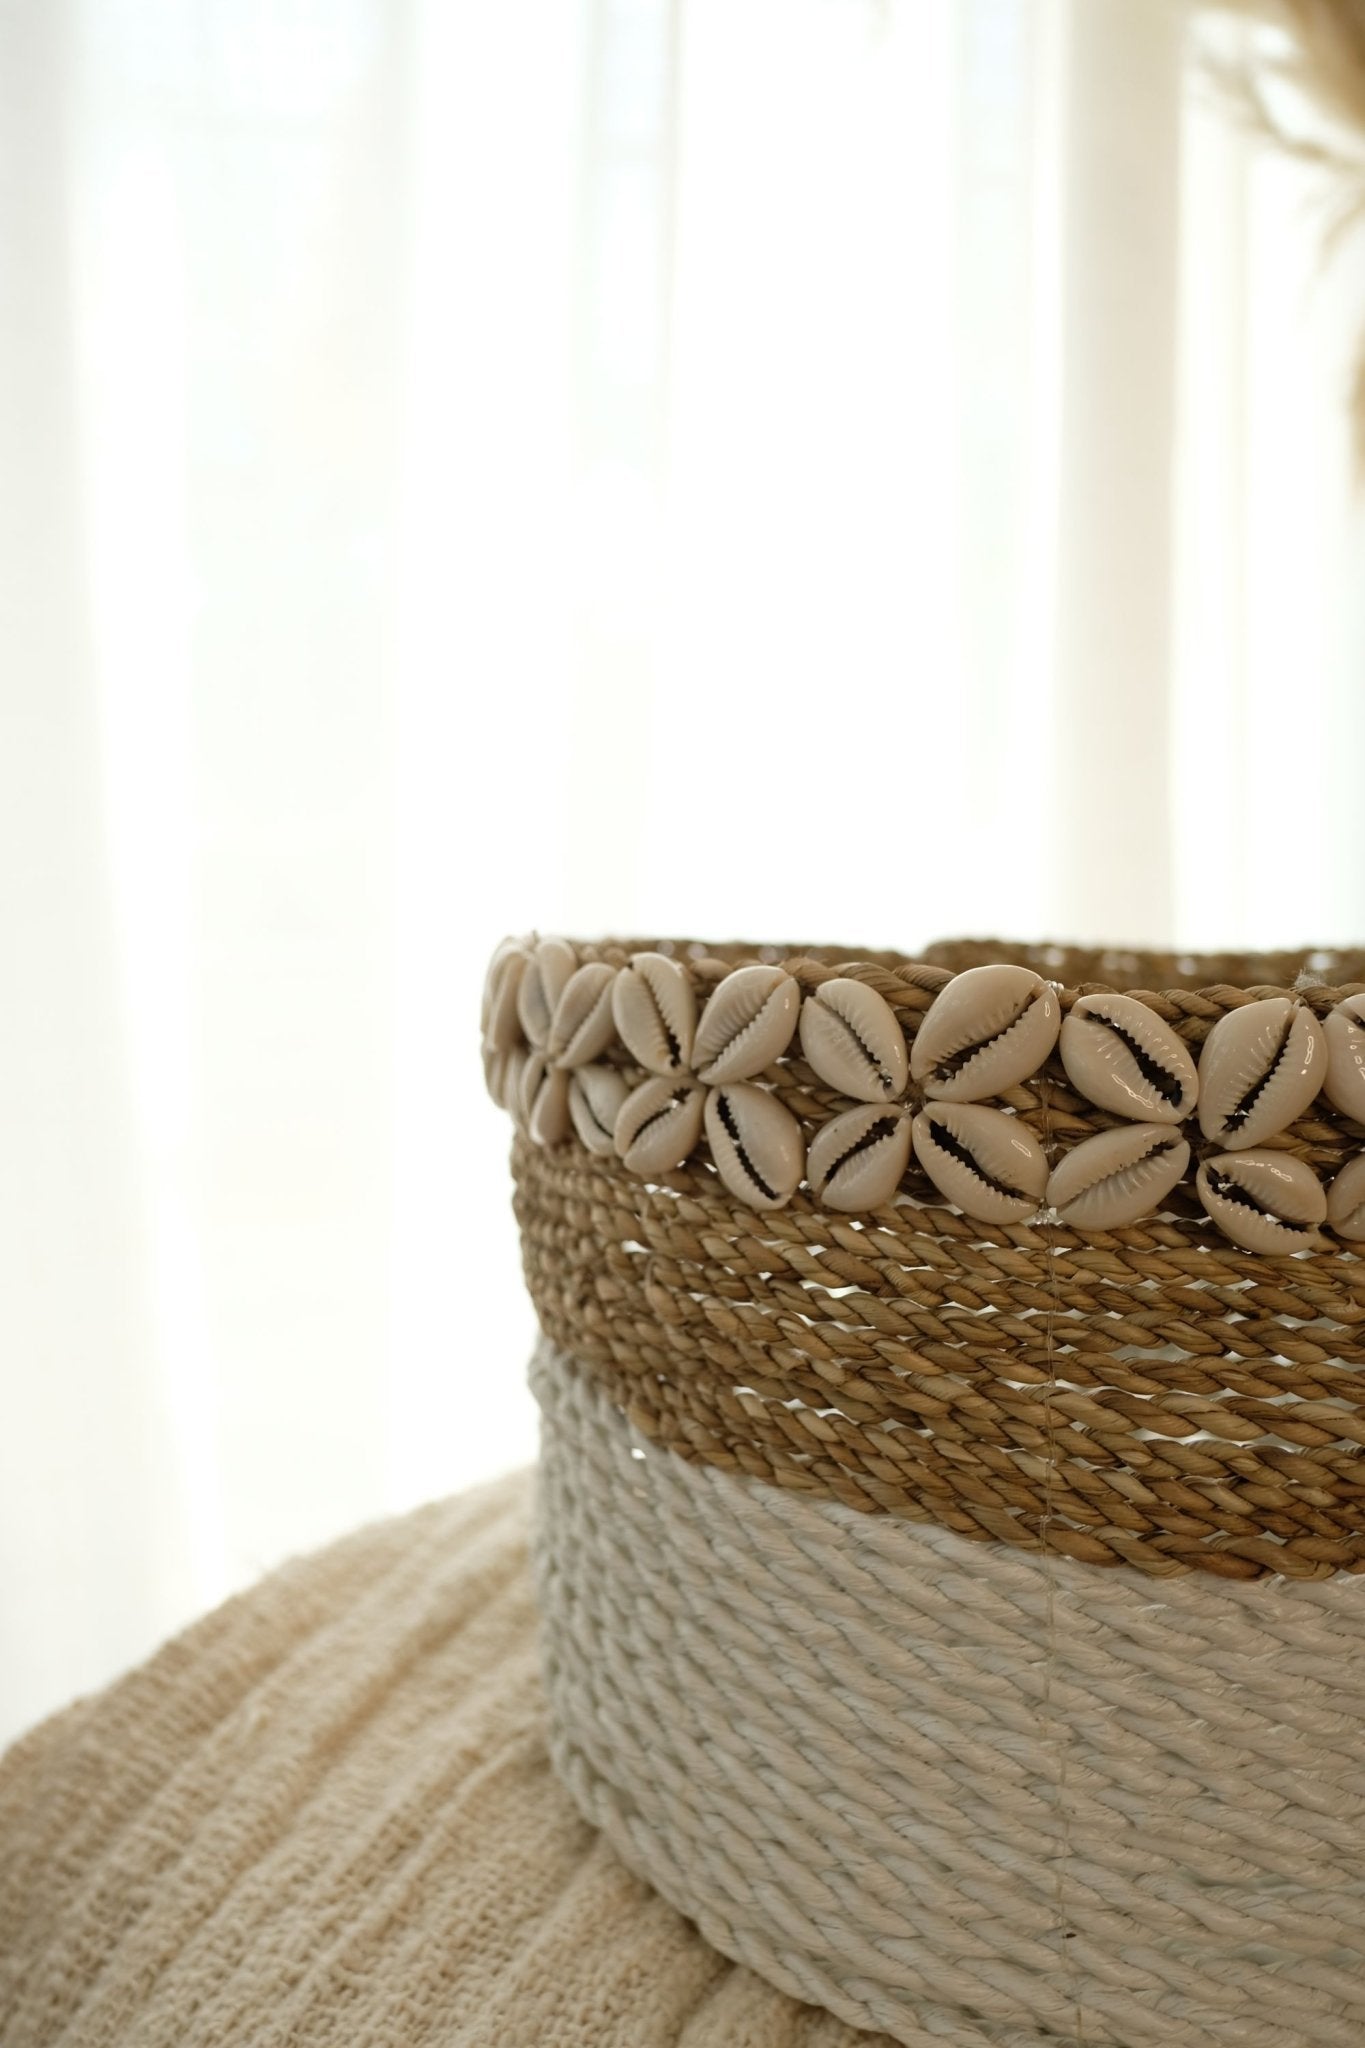 SET OF 3 SHELL NATURAL WHITE ROUND WICKER BASKETS COASTAL DECOR - Lustere Living